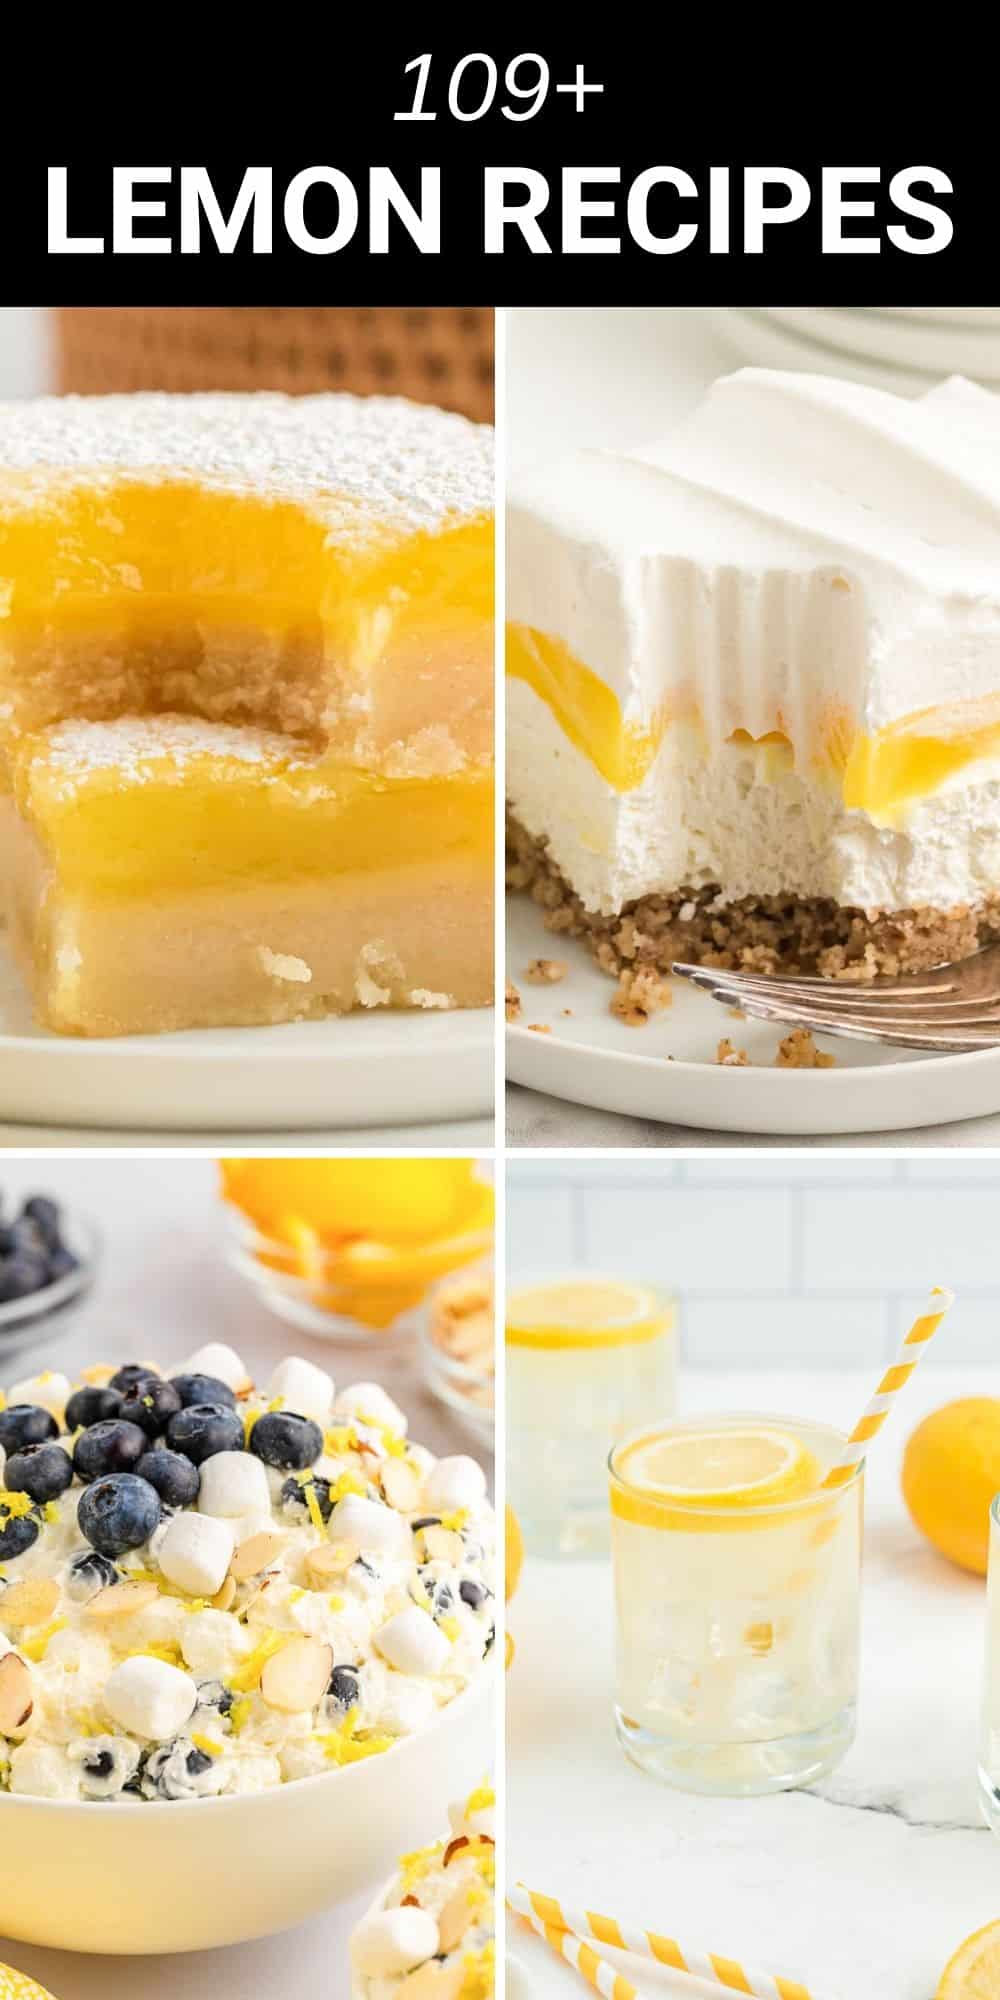 These amazing Lemon Recipes will brighten up your day with a burst of citrusy flavor! From decadent lemon desserts to tangy, savory dishes and even some refreshing lemon beverages, these recipes are showcase ways to enjoy everyone's favorite zesty fruit.